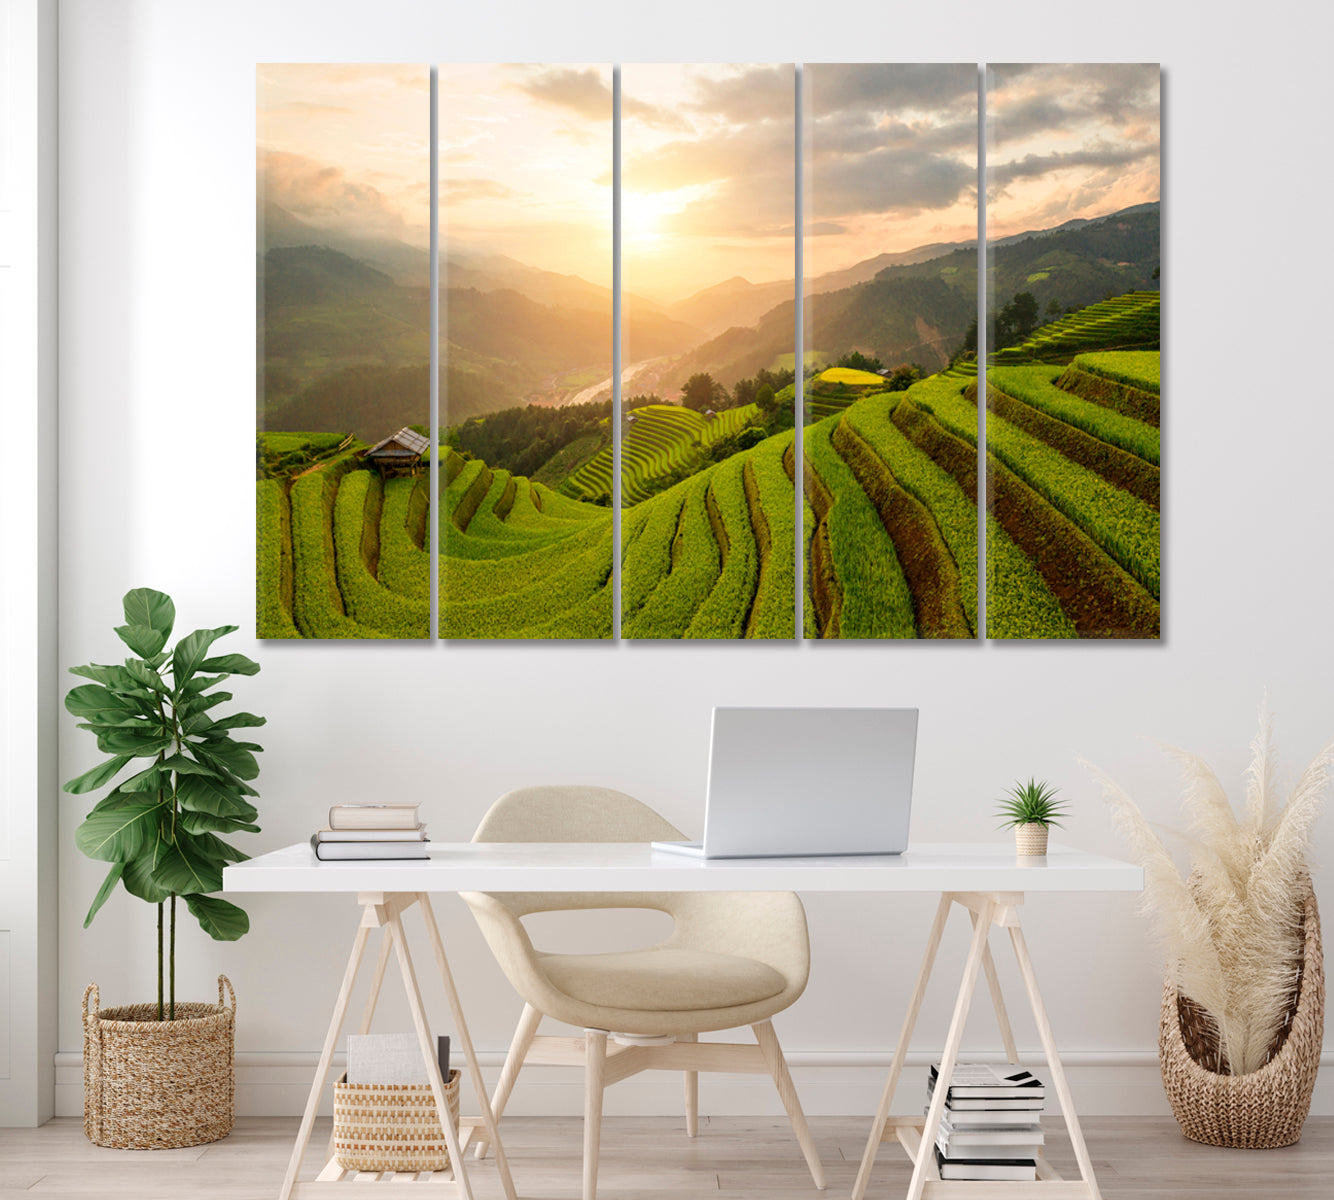 Rice Terraces of Mu Cang Chai Asia Vietnam Canvas Print ArtLexy 5 Panels 36"x24" inches 